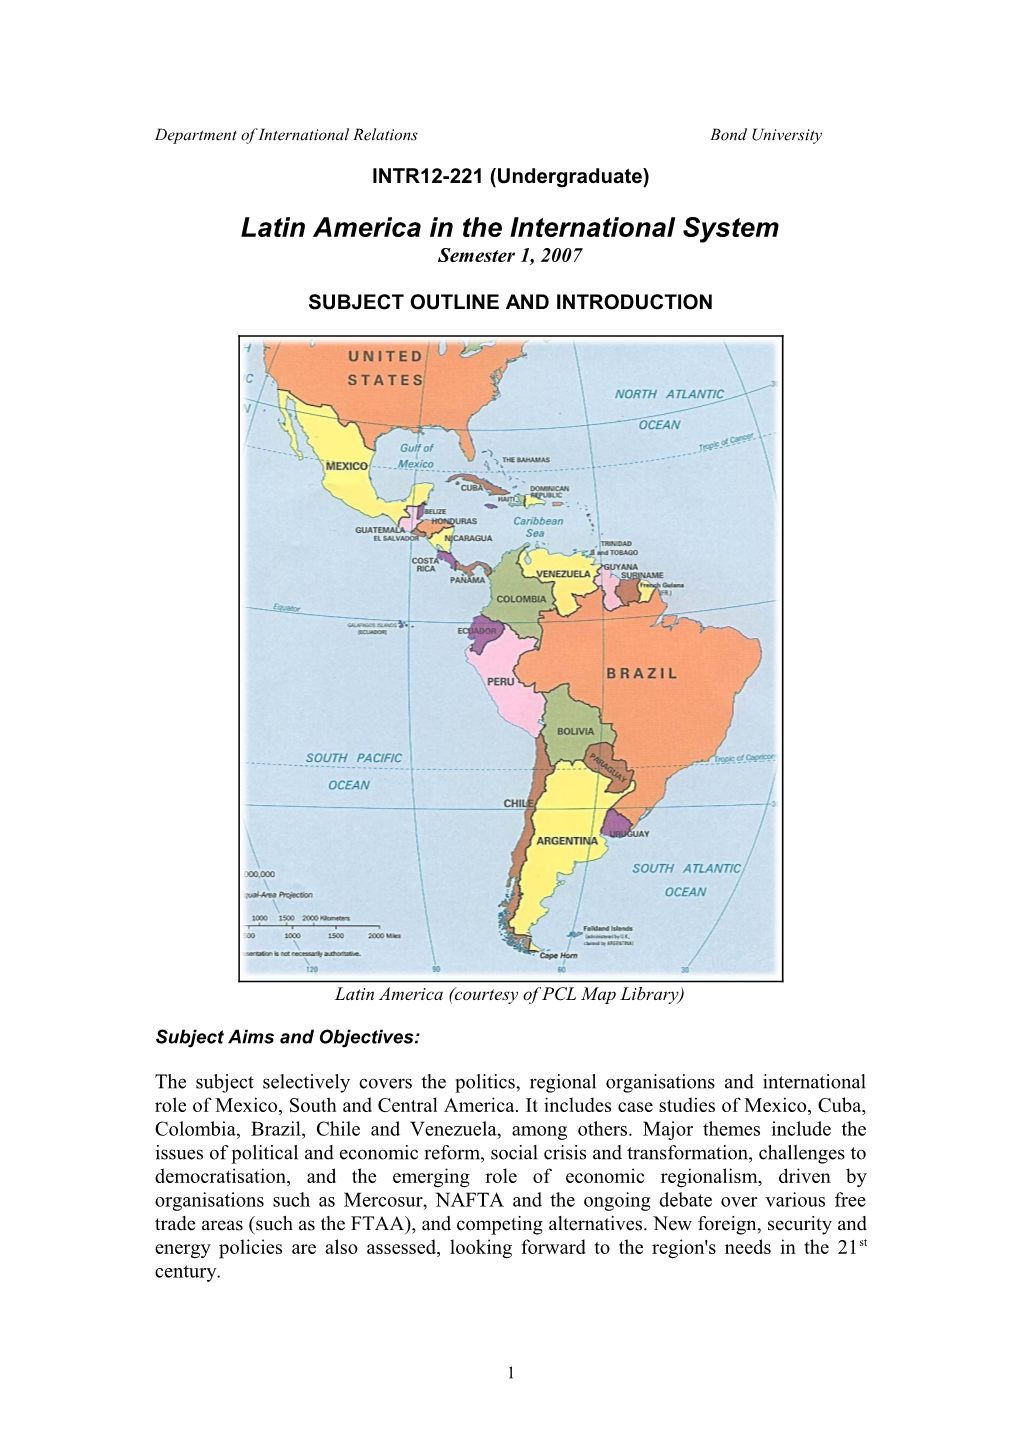 South and Central America in the International System